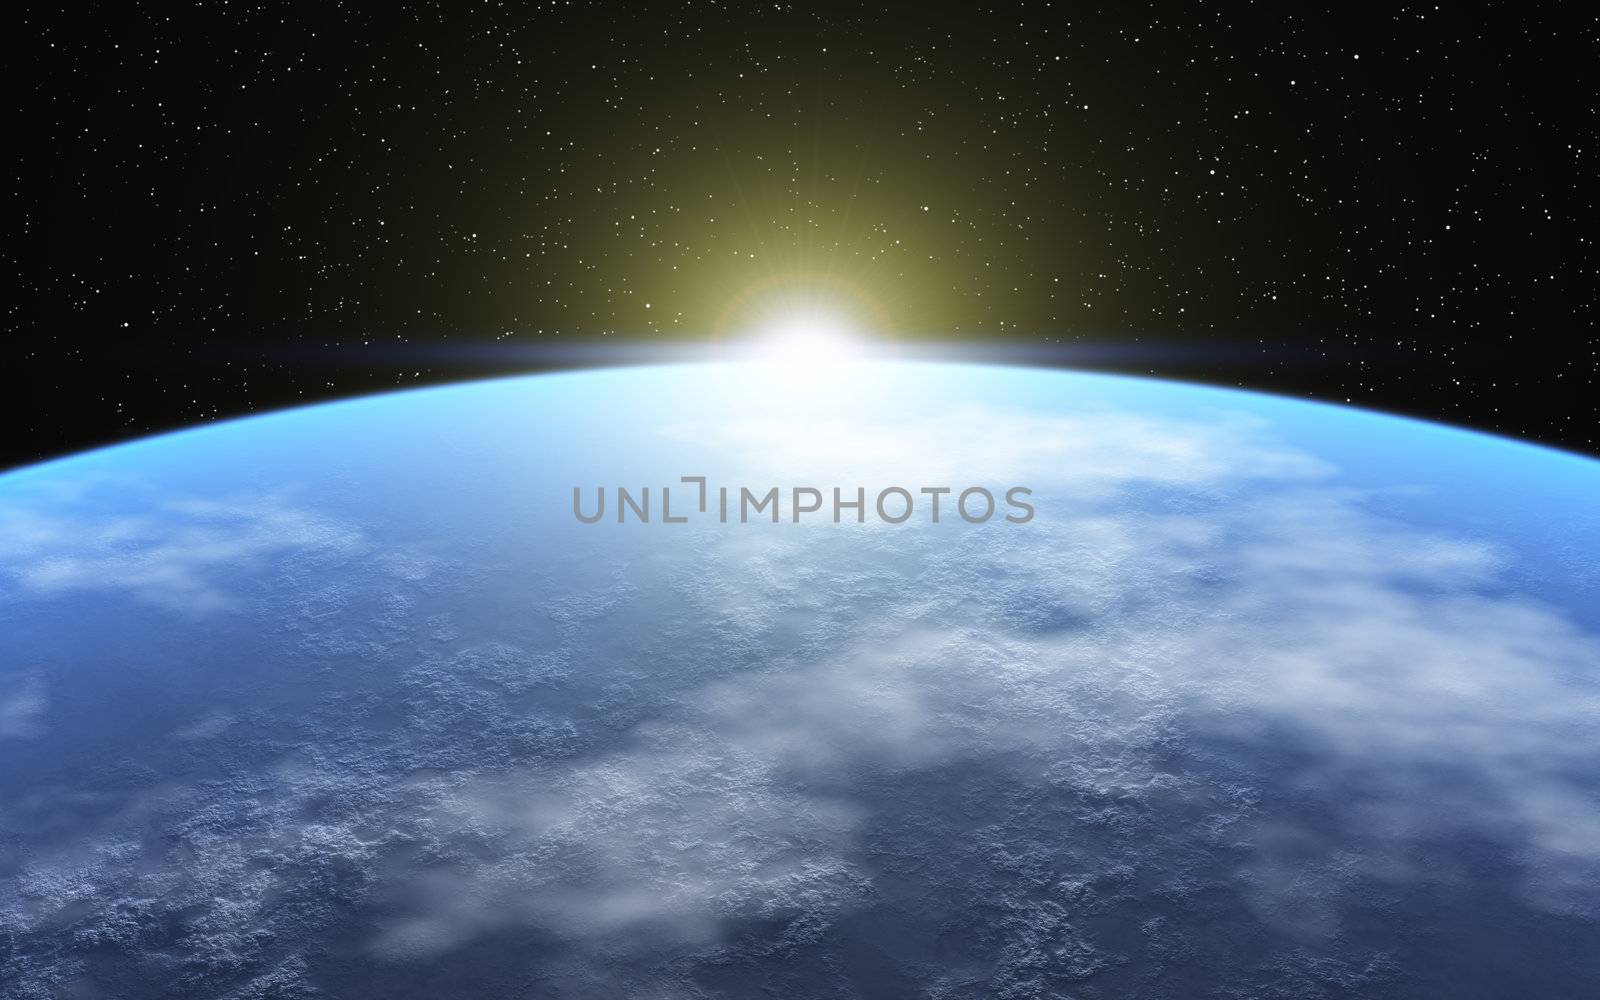 This image shows a frozen planet with atmosphere